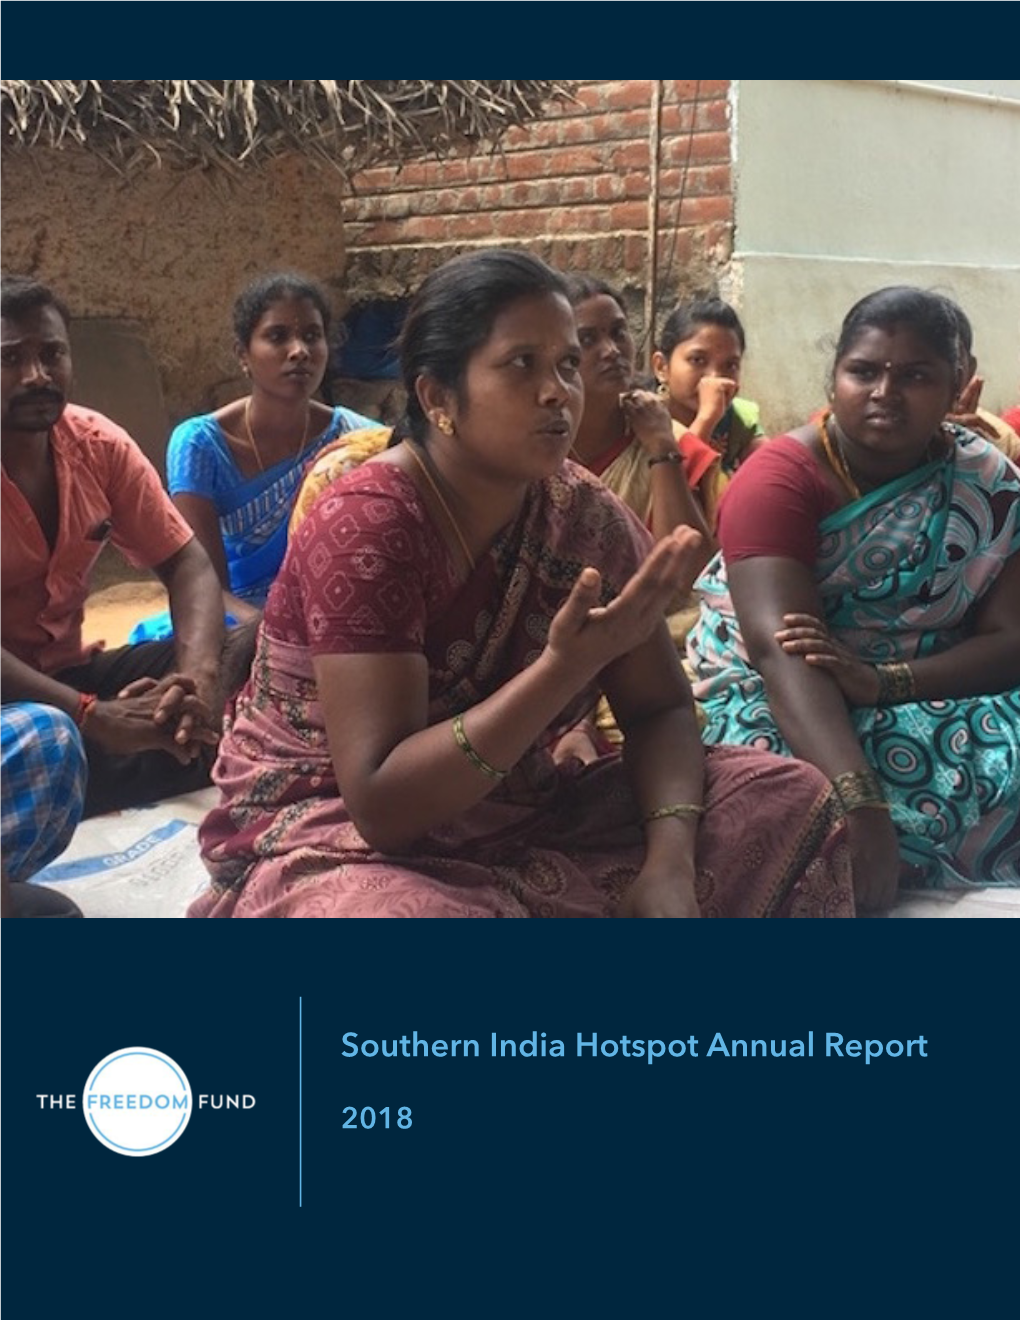 Southern India Hotspot Annual Report